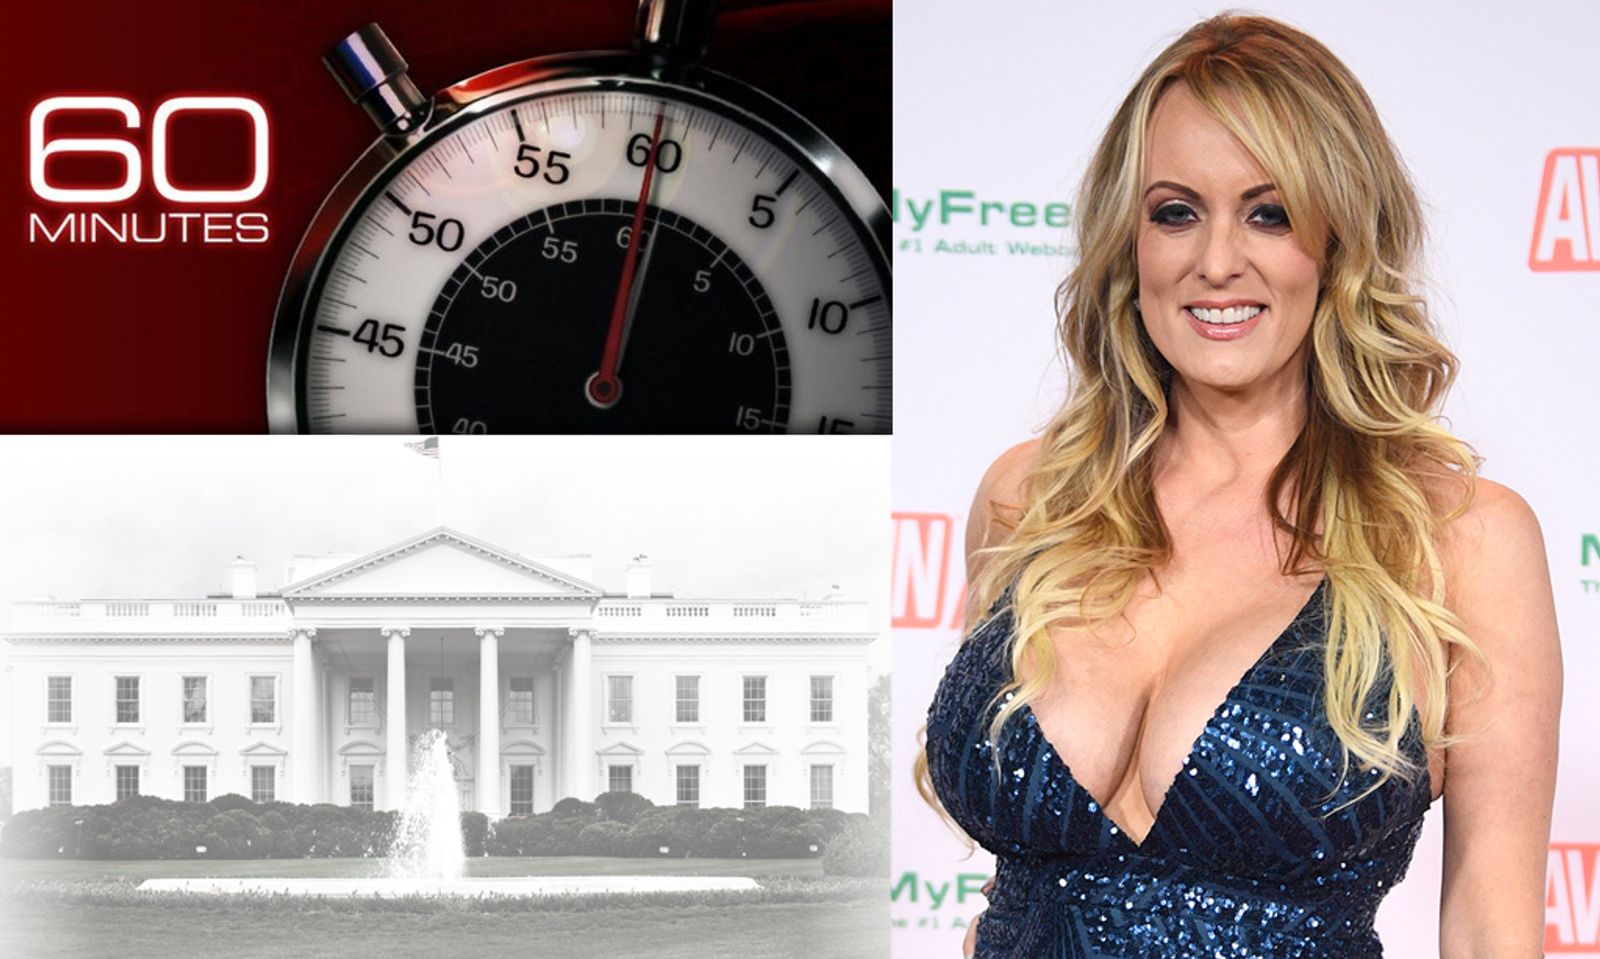 Report: Trump Tries to Stop Stormy Daniels '60 Minutes' Interview